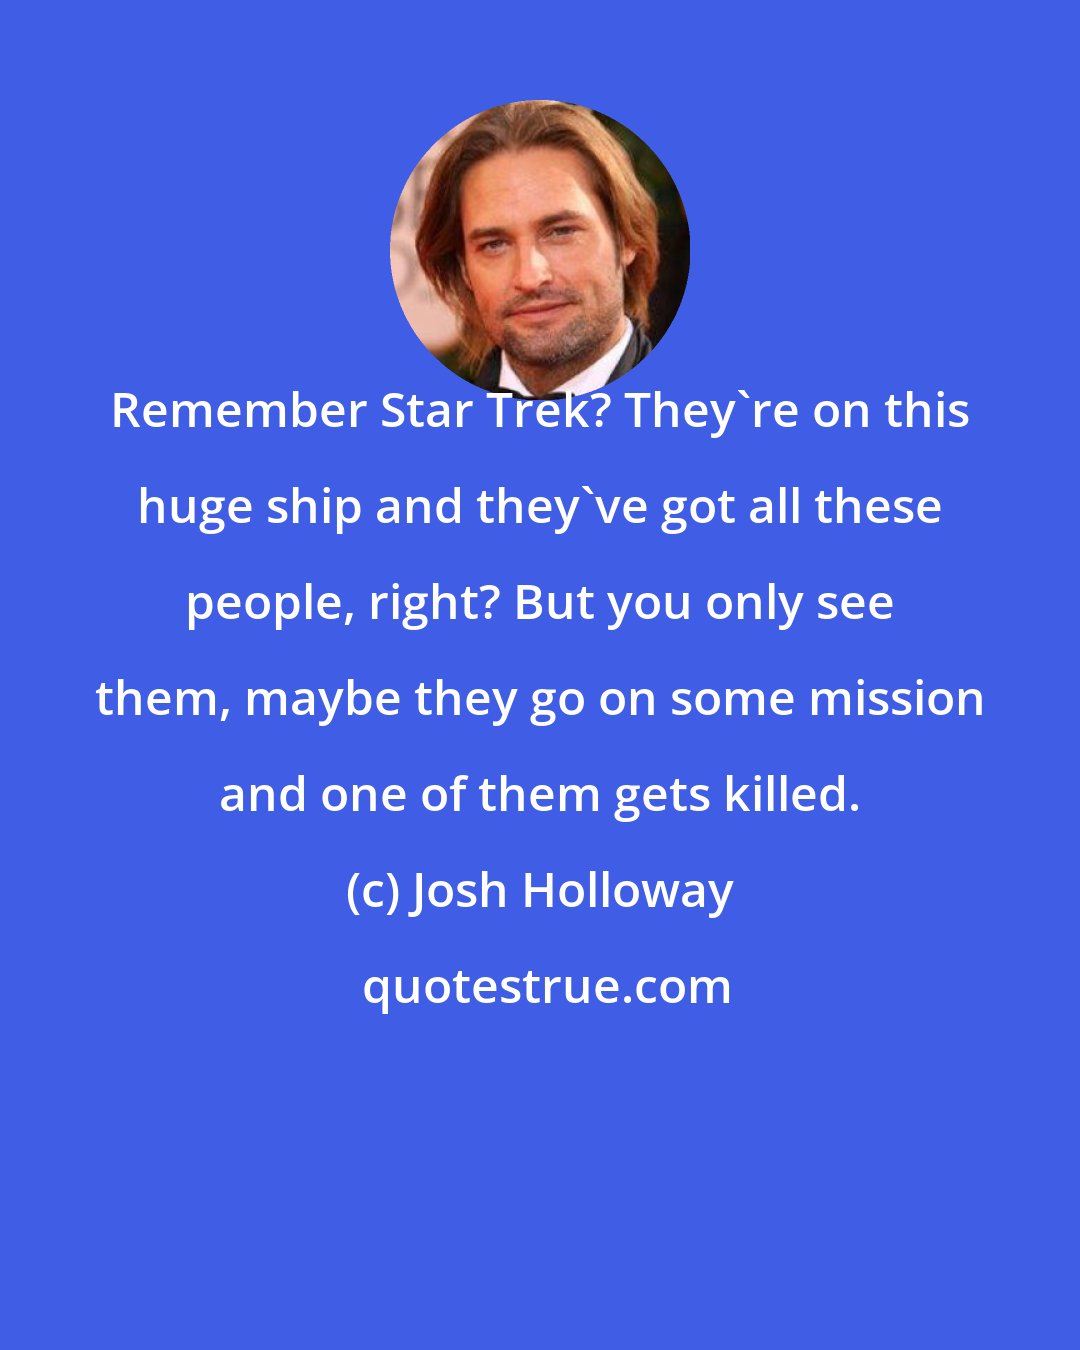 Josh Holloway: Remember Star Trek? They're on this huge ship and they've got all these people, right? But you only see them, maybe they go on some mission and one of them gets killed.